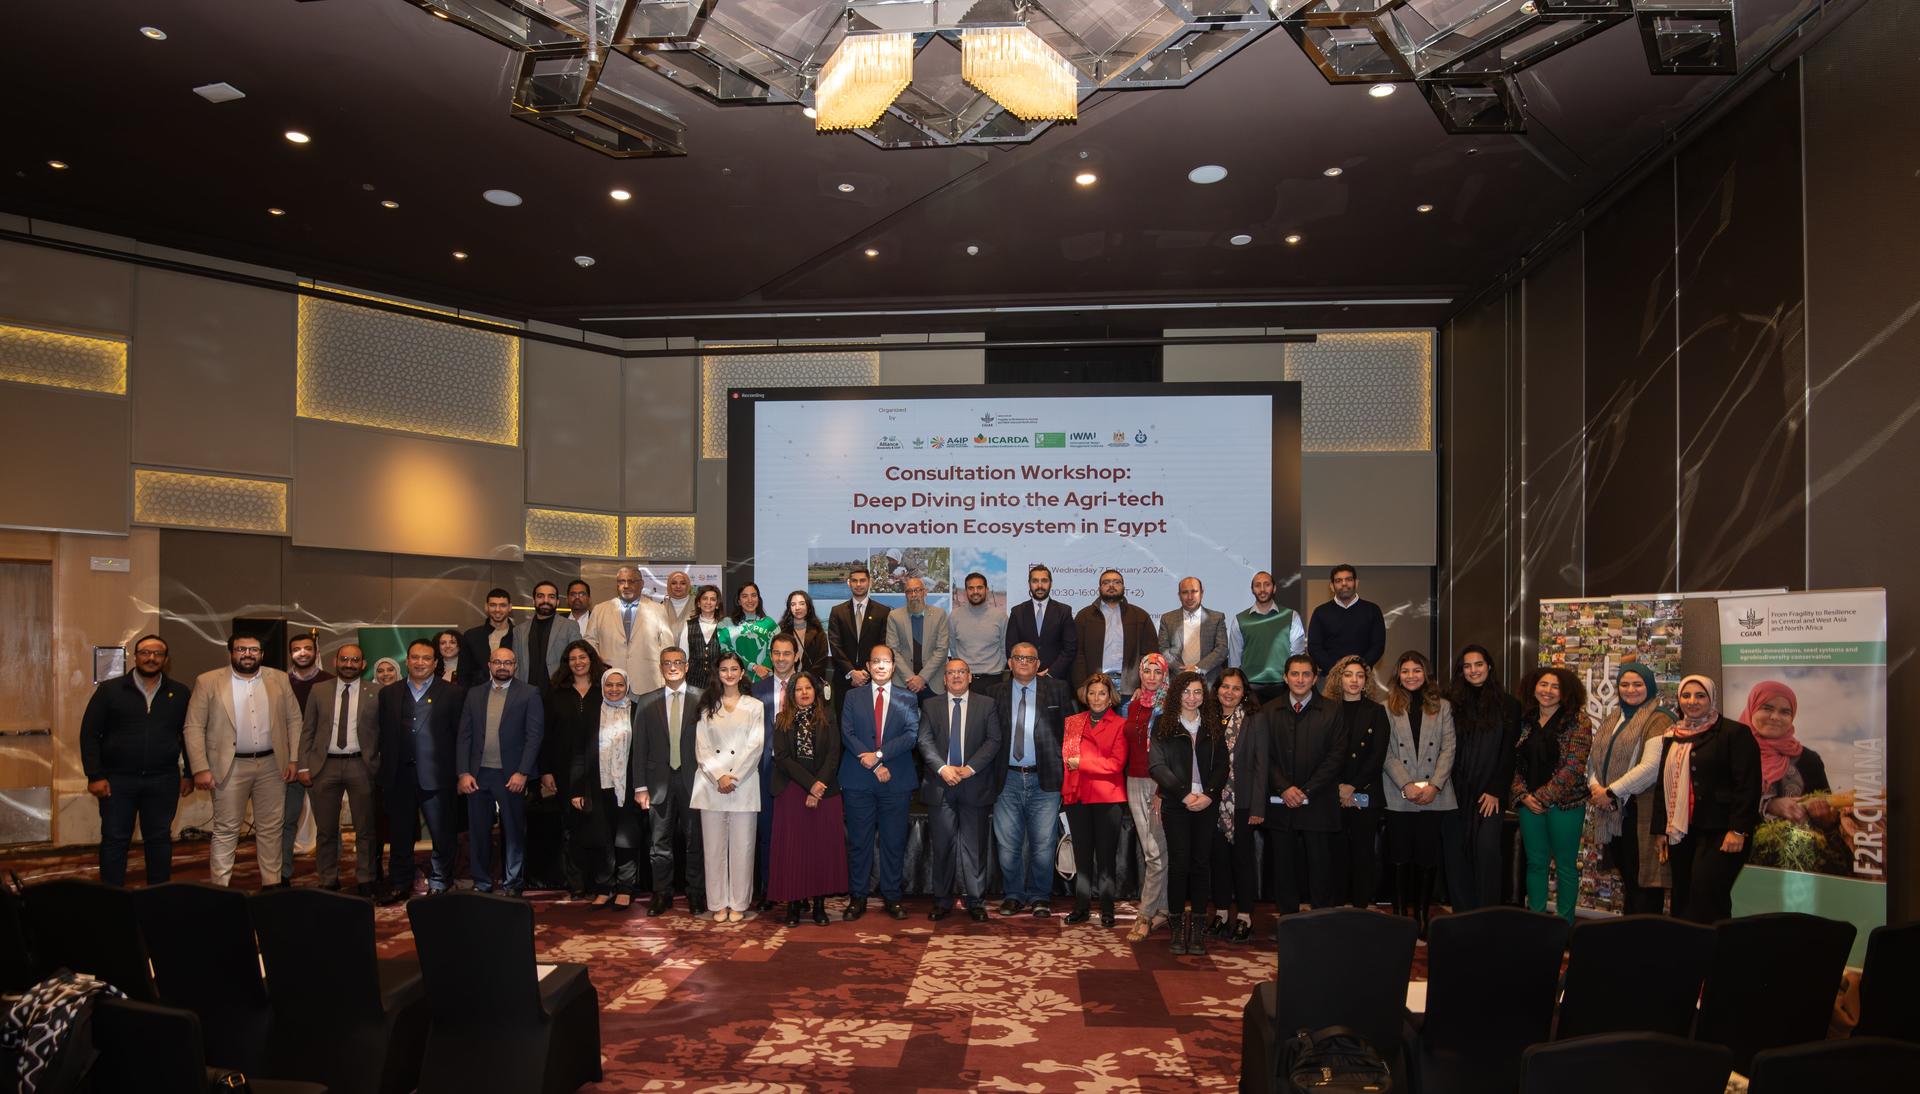 Deep Diving into the Agri-tech Innovation Ecosystem in Egypt’ with CGIAR and the Academy of Scientific Research and Technology - Alliance Bioversity International - CIAT